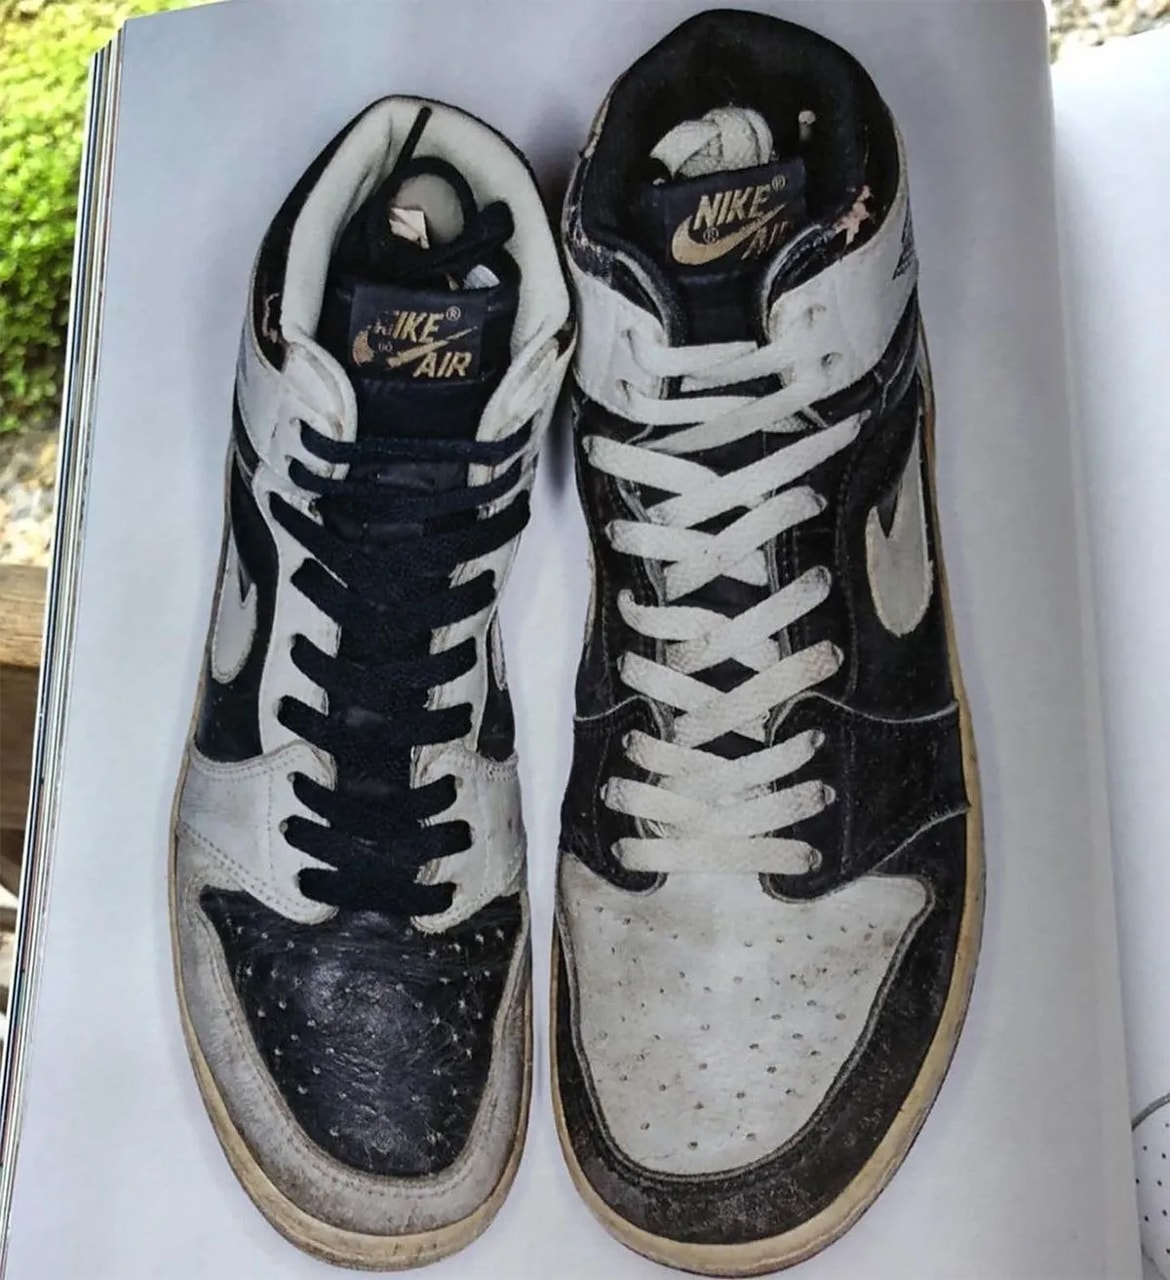 air michael jordan brand 1 hi 85 shadow hv6674 020 official release date info photos price store list buying guide